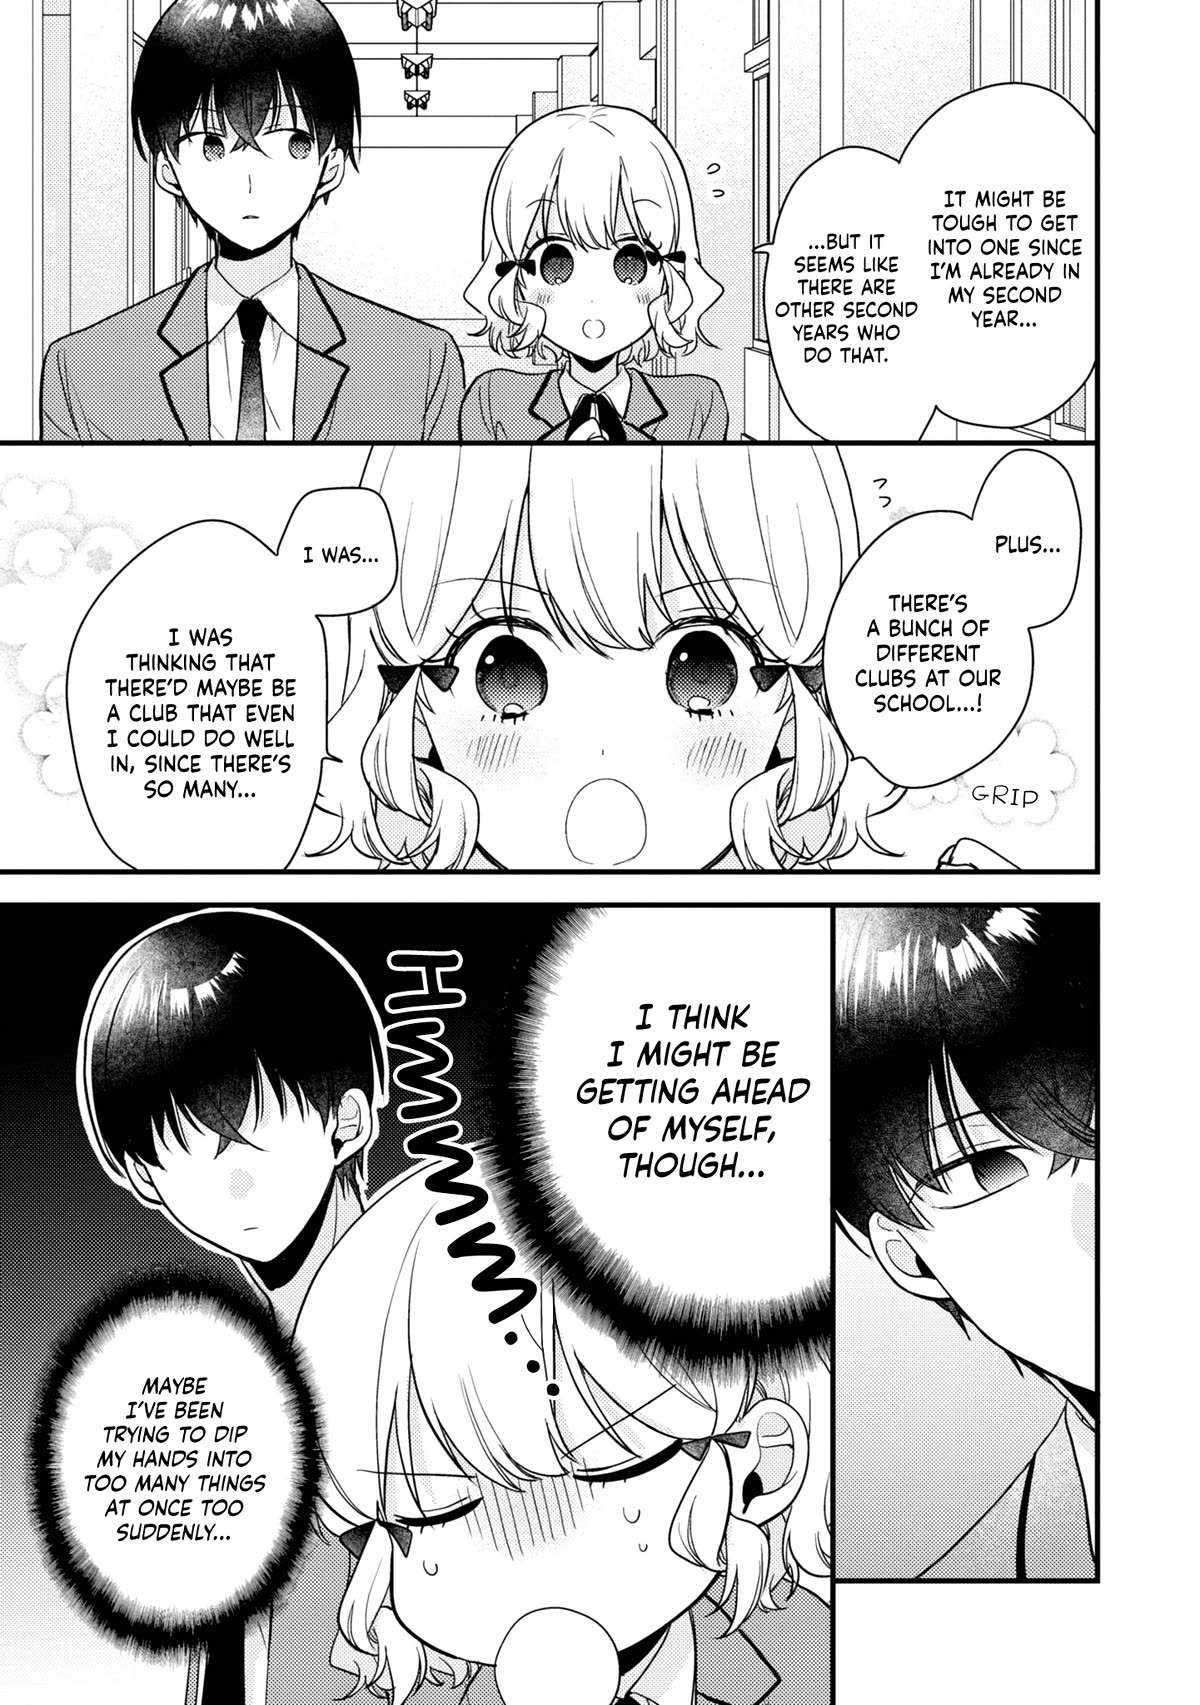 I Have A Second Chance At Life, So I’Ll Pamper My Yandere Boyfriend For A Happy Ending!! Chapter 4 #10